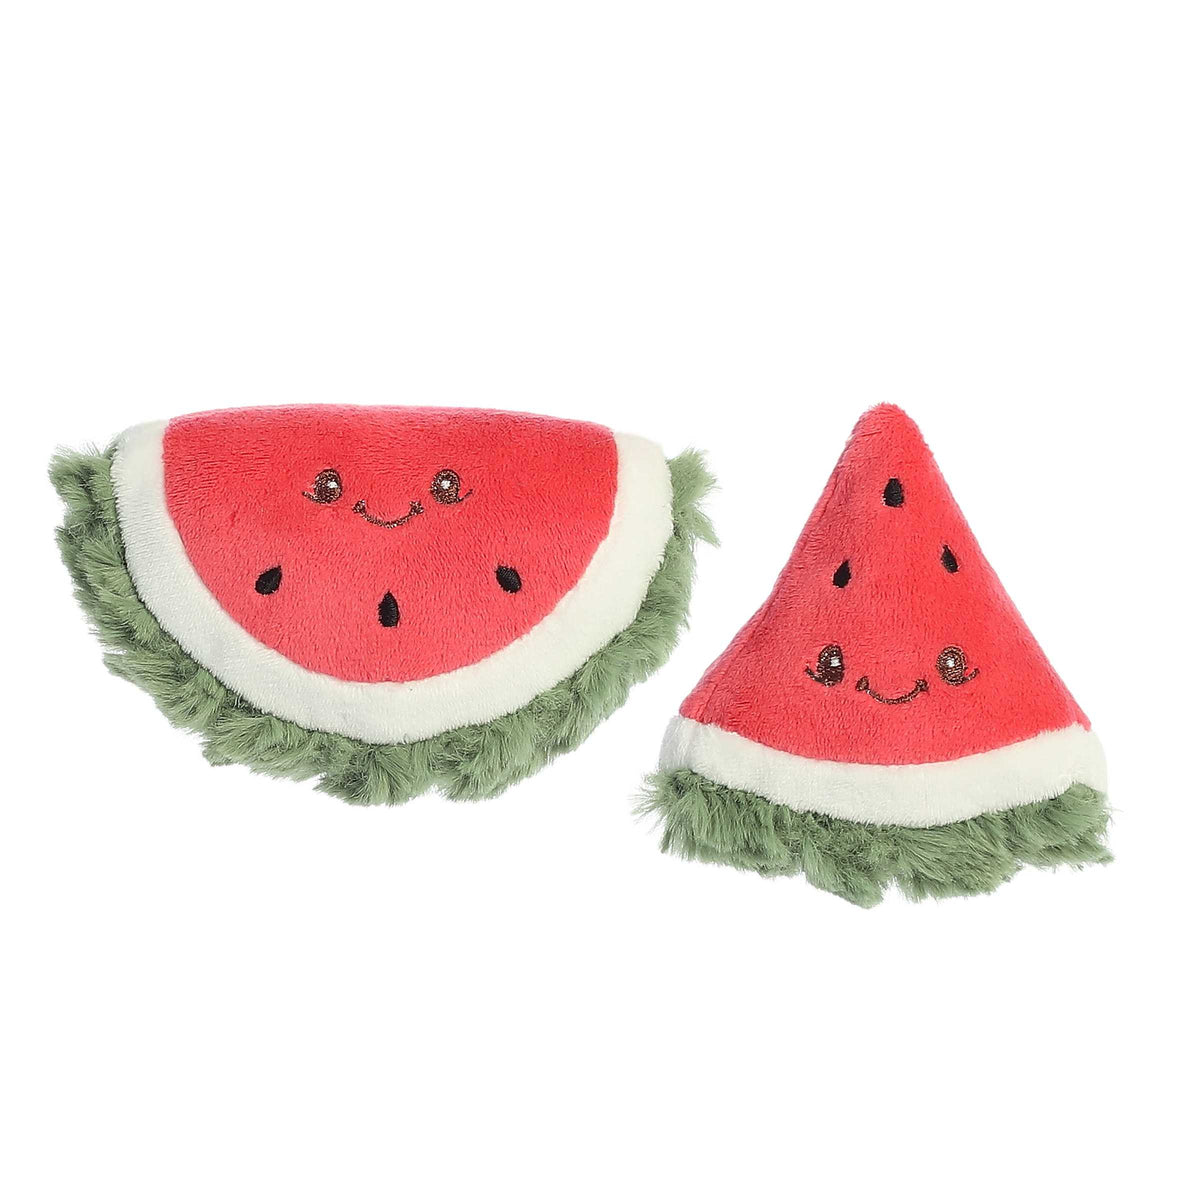 Playful Watermelon plush toy set with red and white watermelon rattle and slice crinkle with smiling face and green fur